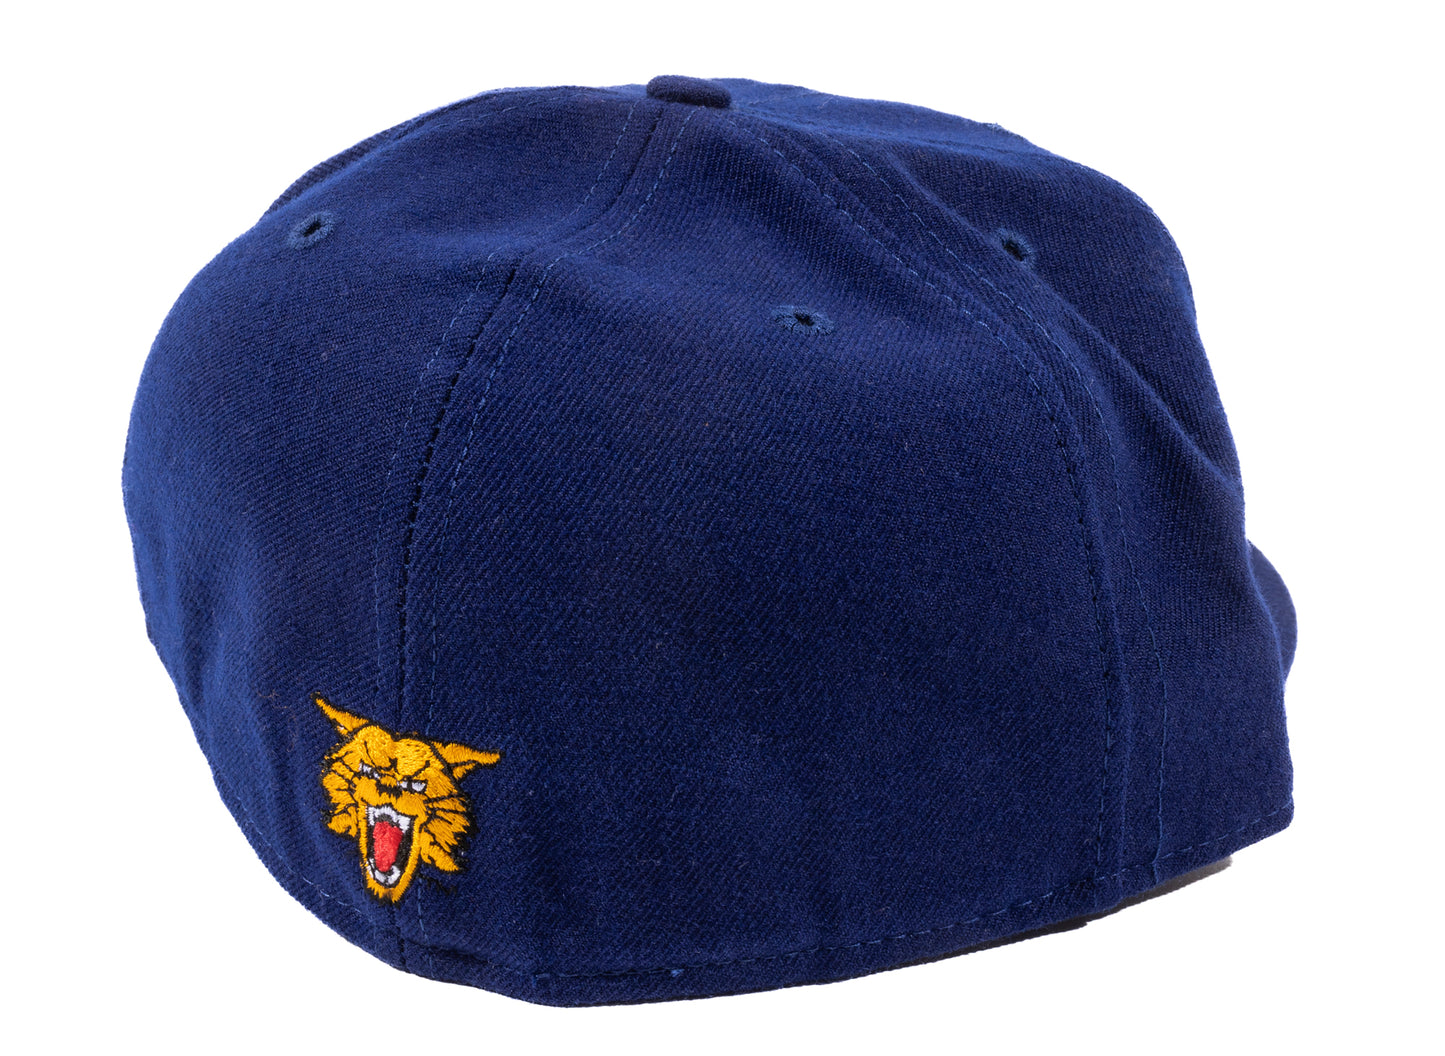 Vintage Kentucky Fitted Hat